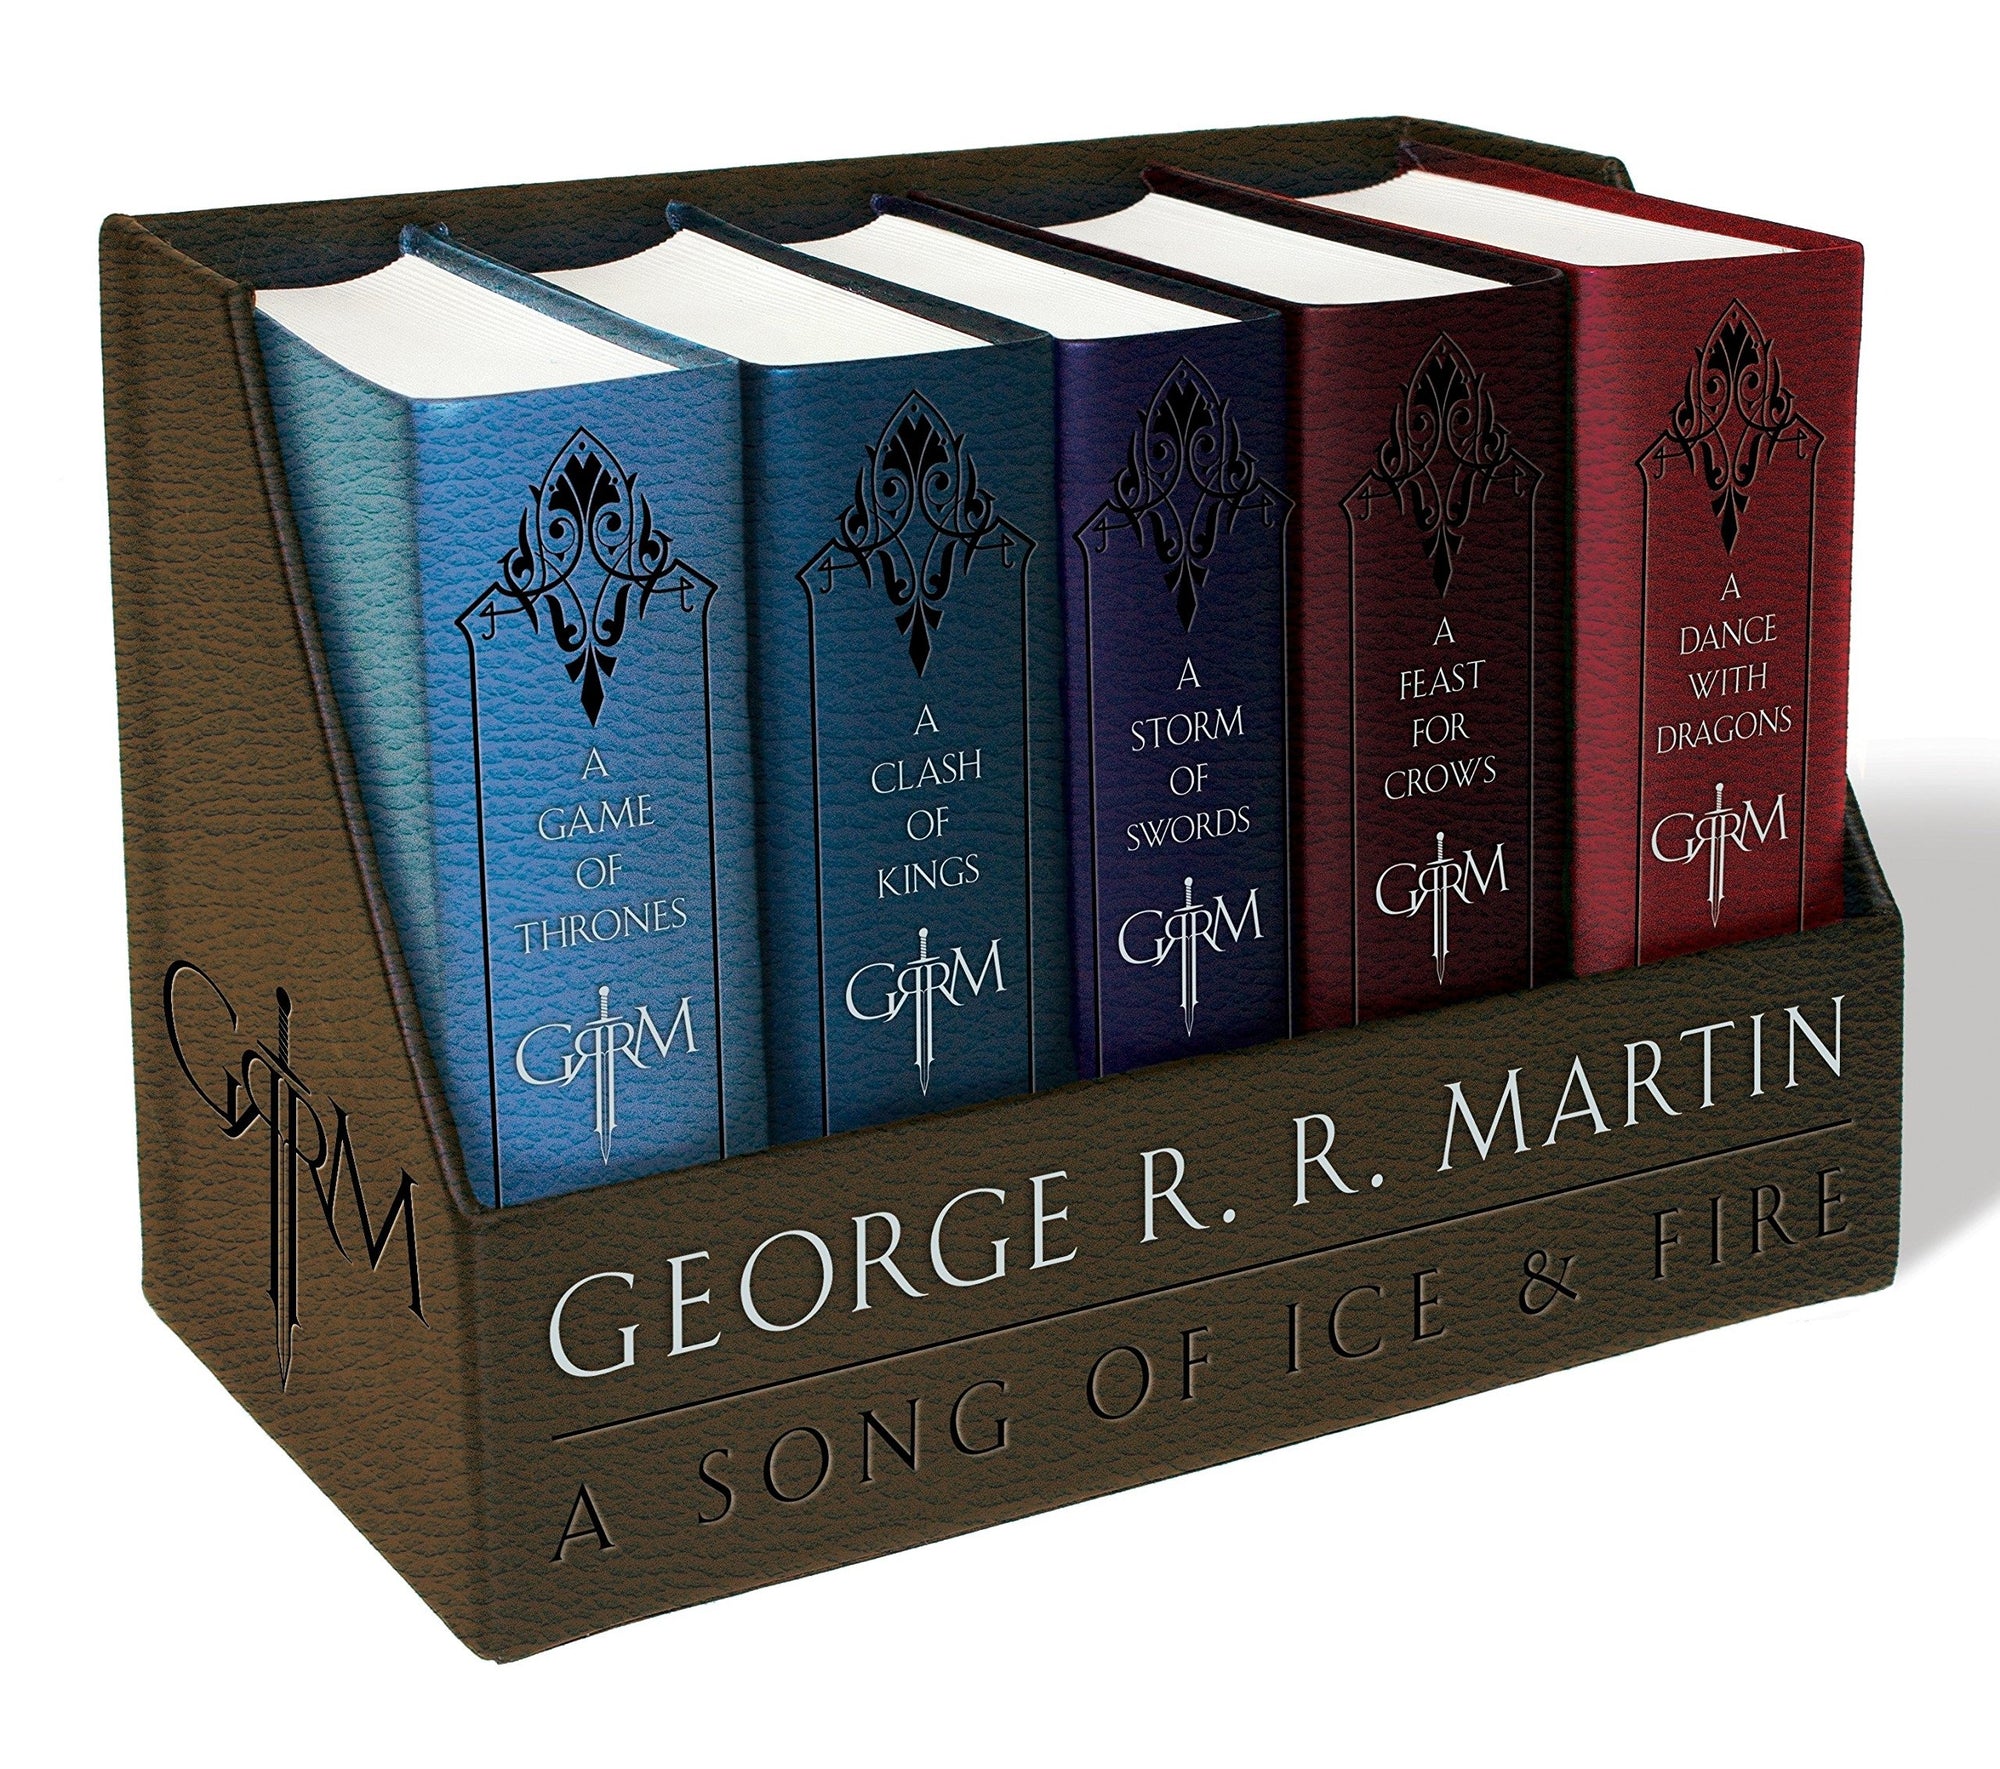 A Game of Thrones by George R. R. Martin Leather-Bound Set (PREORDER)